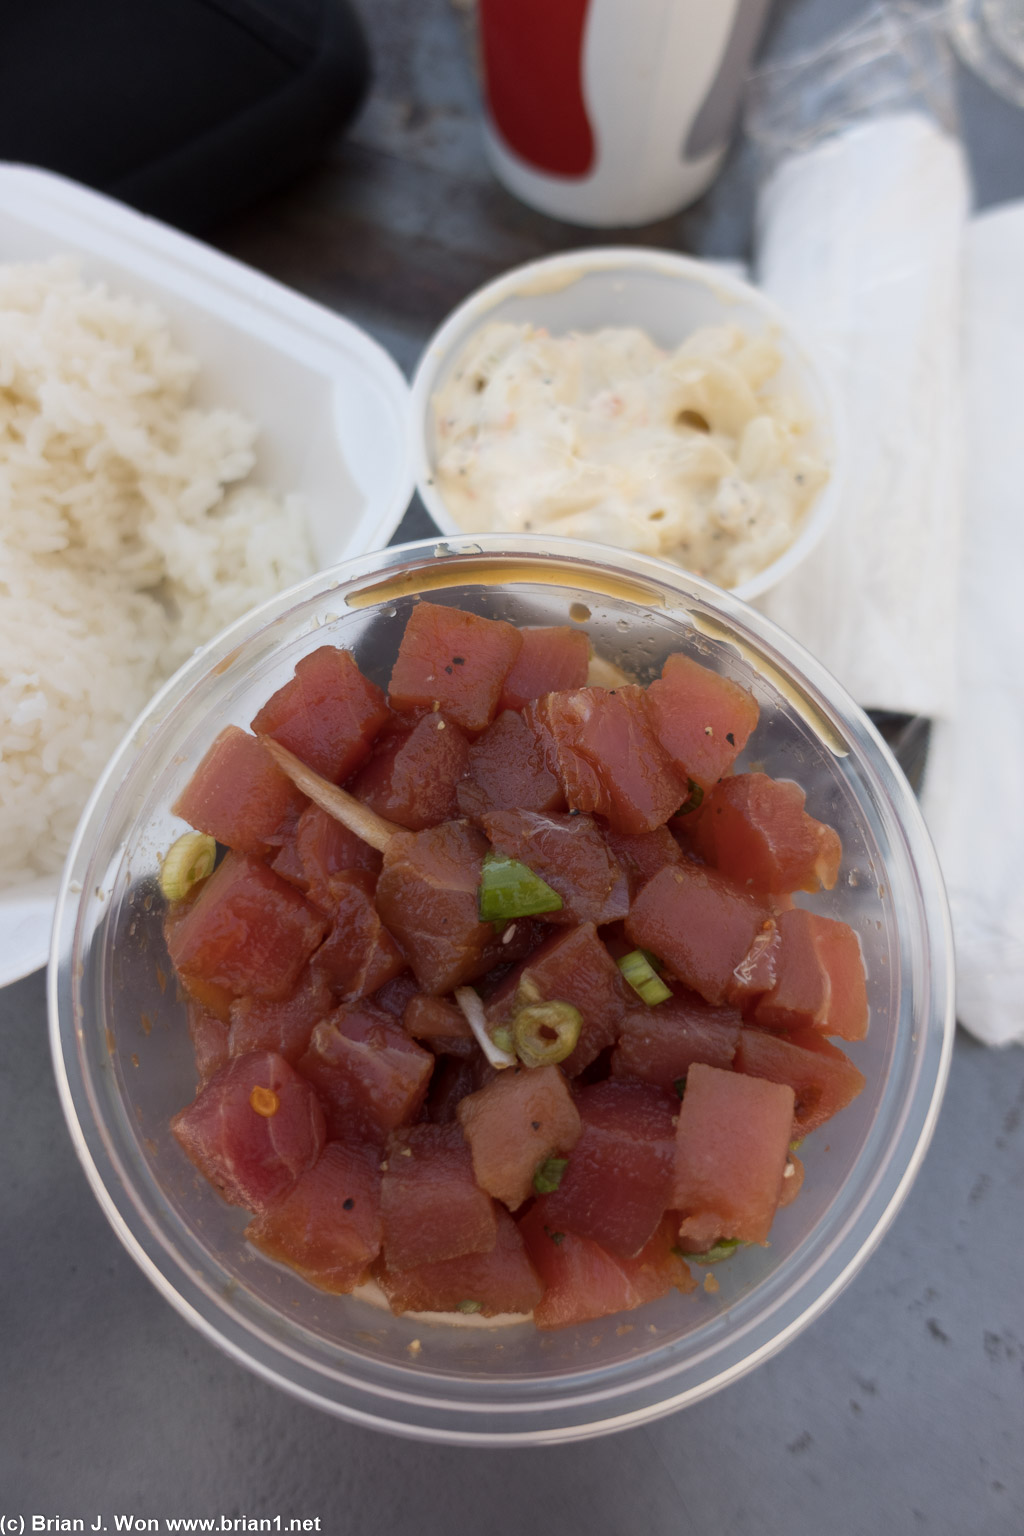 Shoyu ahi poke was gross. Tasted mostly of soy sauce and not much else.